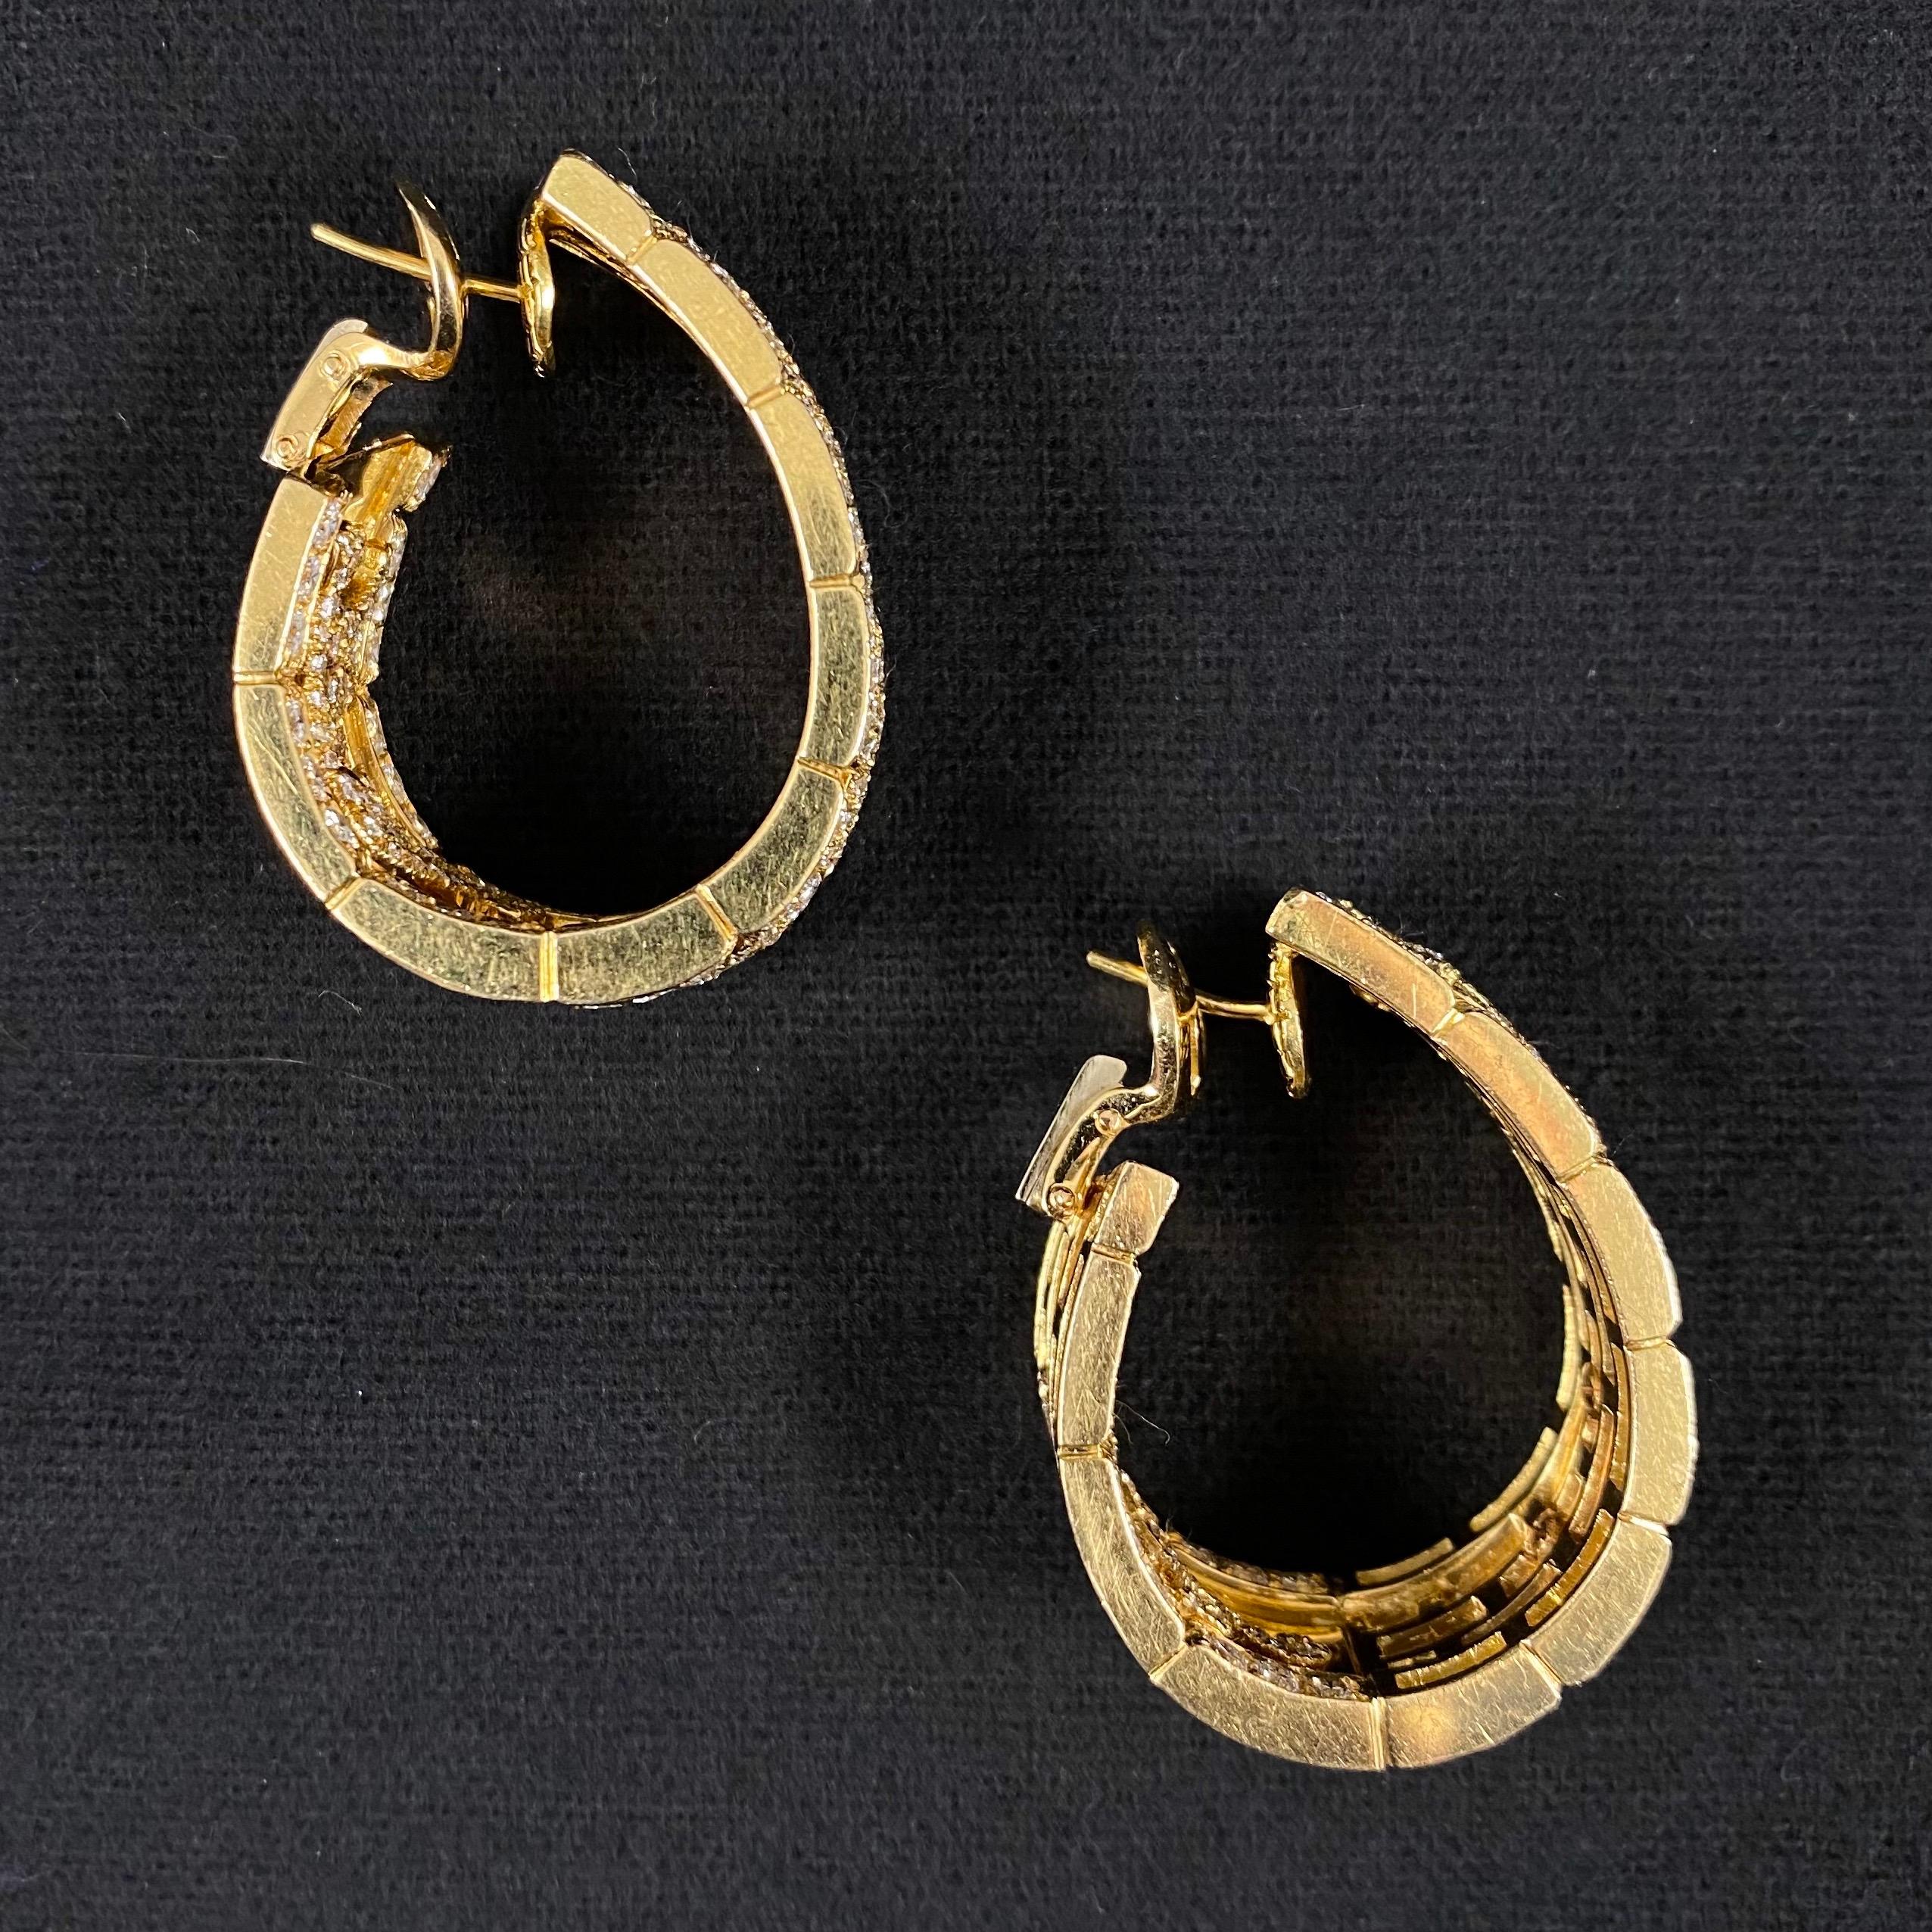 panther earrings cartier